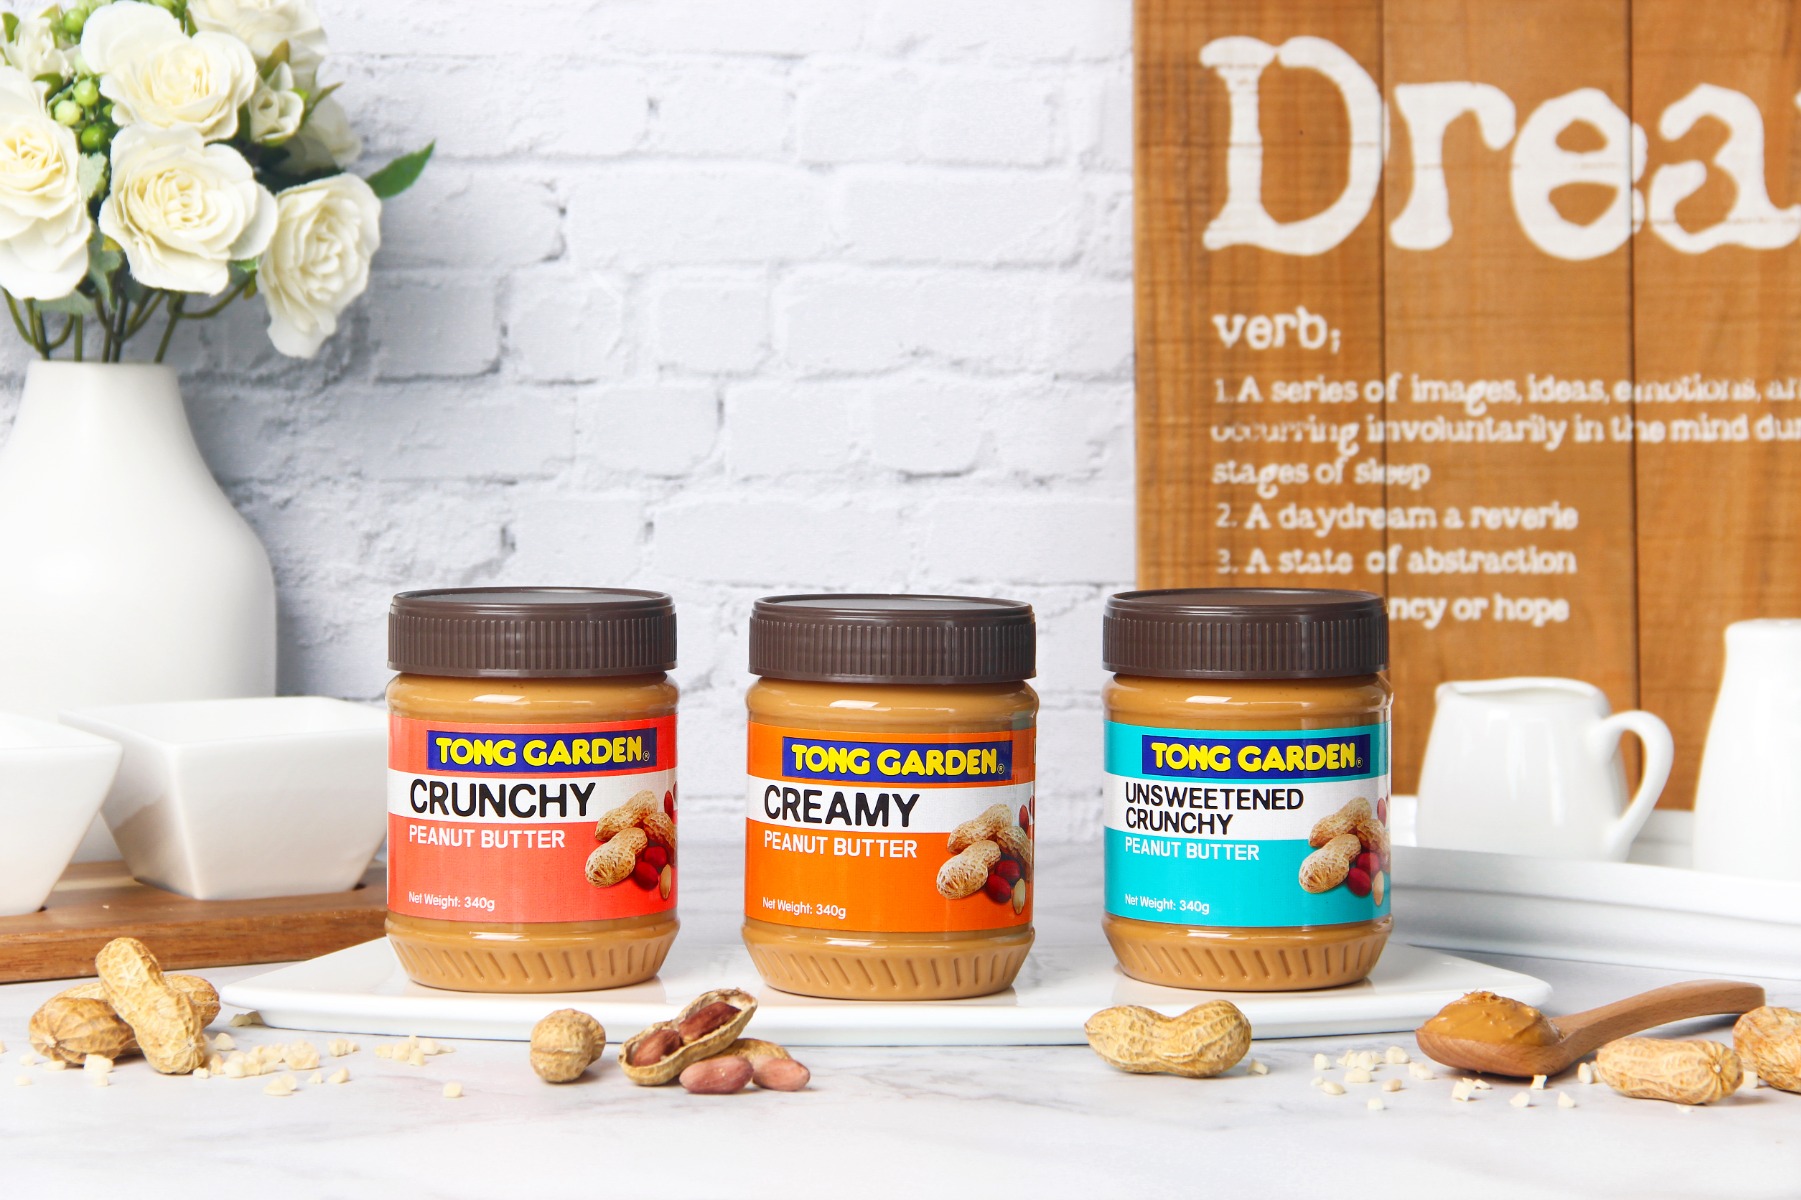 Peanut Butter: All Natural, Wholesome & Delicious Flavour